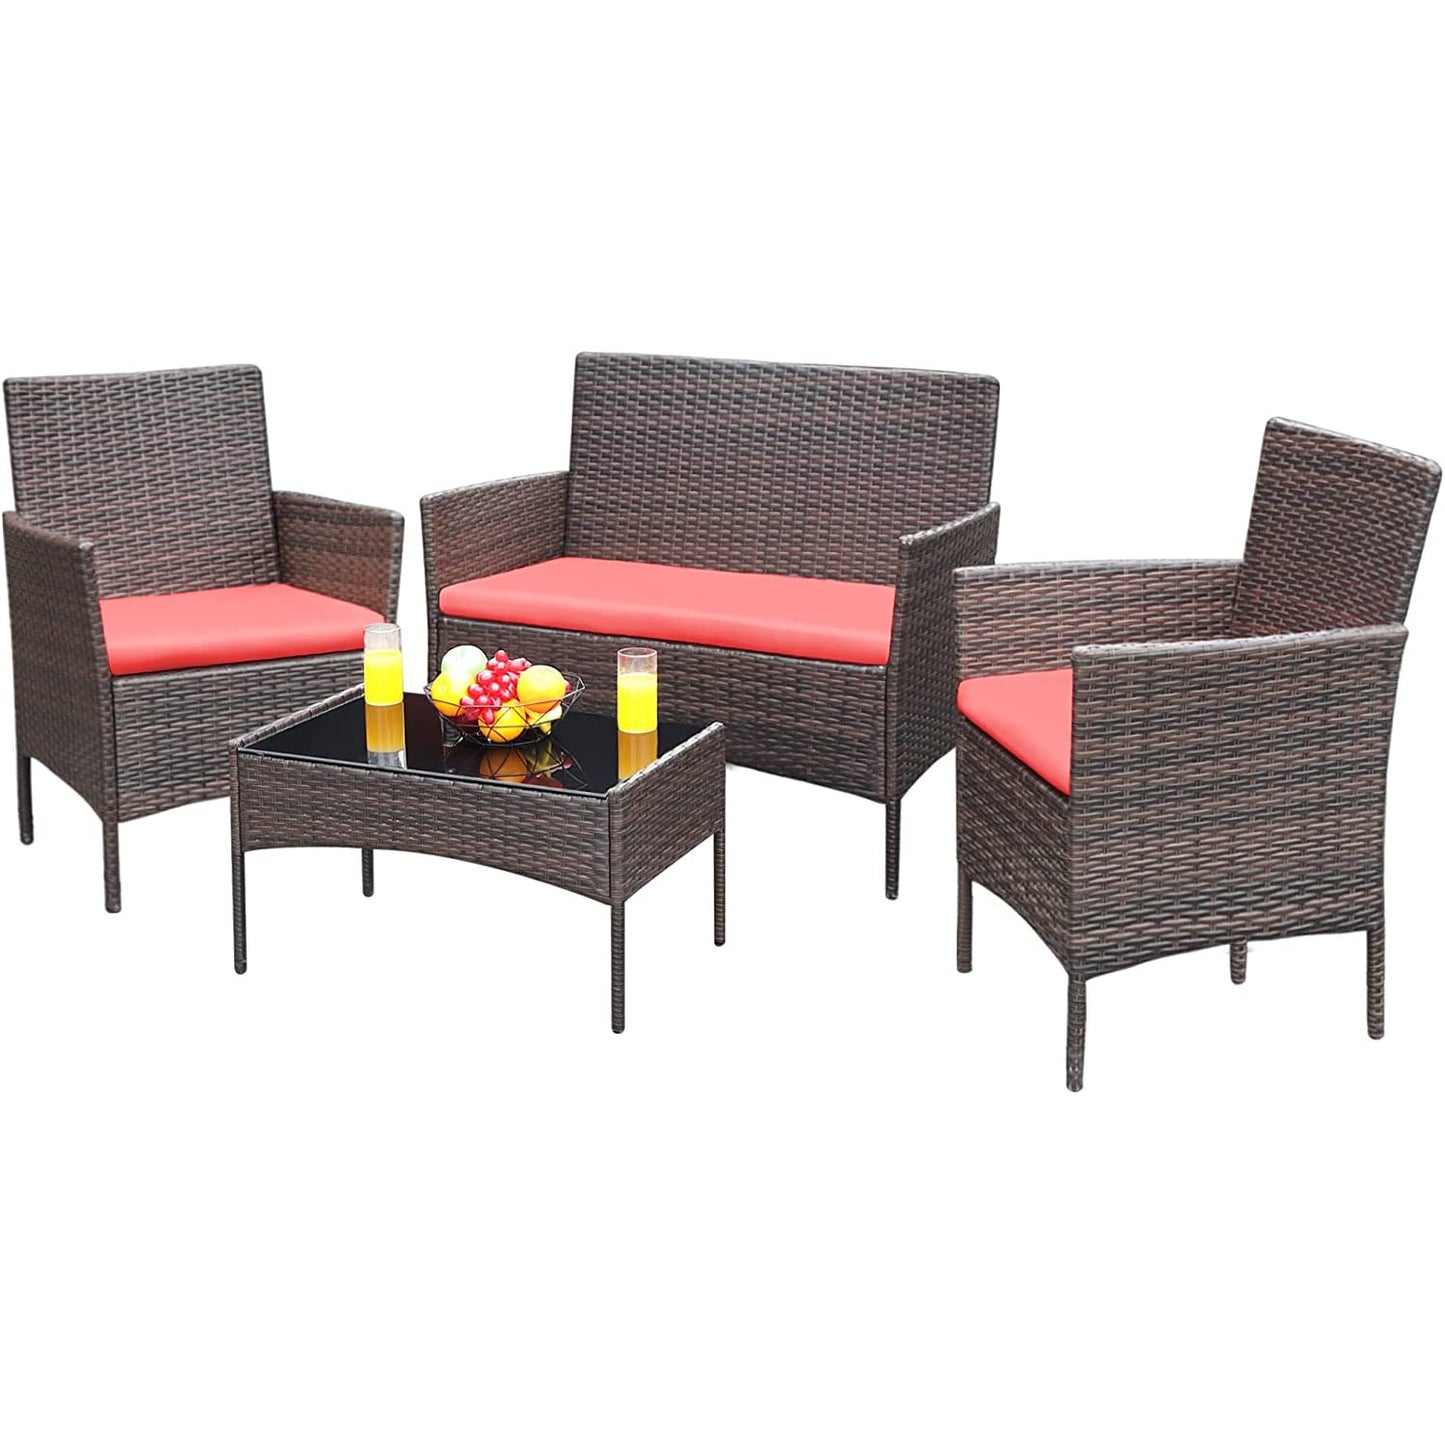 Patio Watcher Patio Furniture 4 Pieces Conversation Sets Outdoor Wicker Rattan Chairs Garden Backyard Balcony Porch Poolside loveseat with Soft Cushion and Glass Table